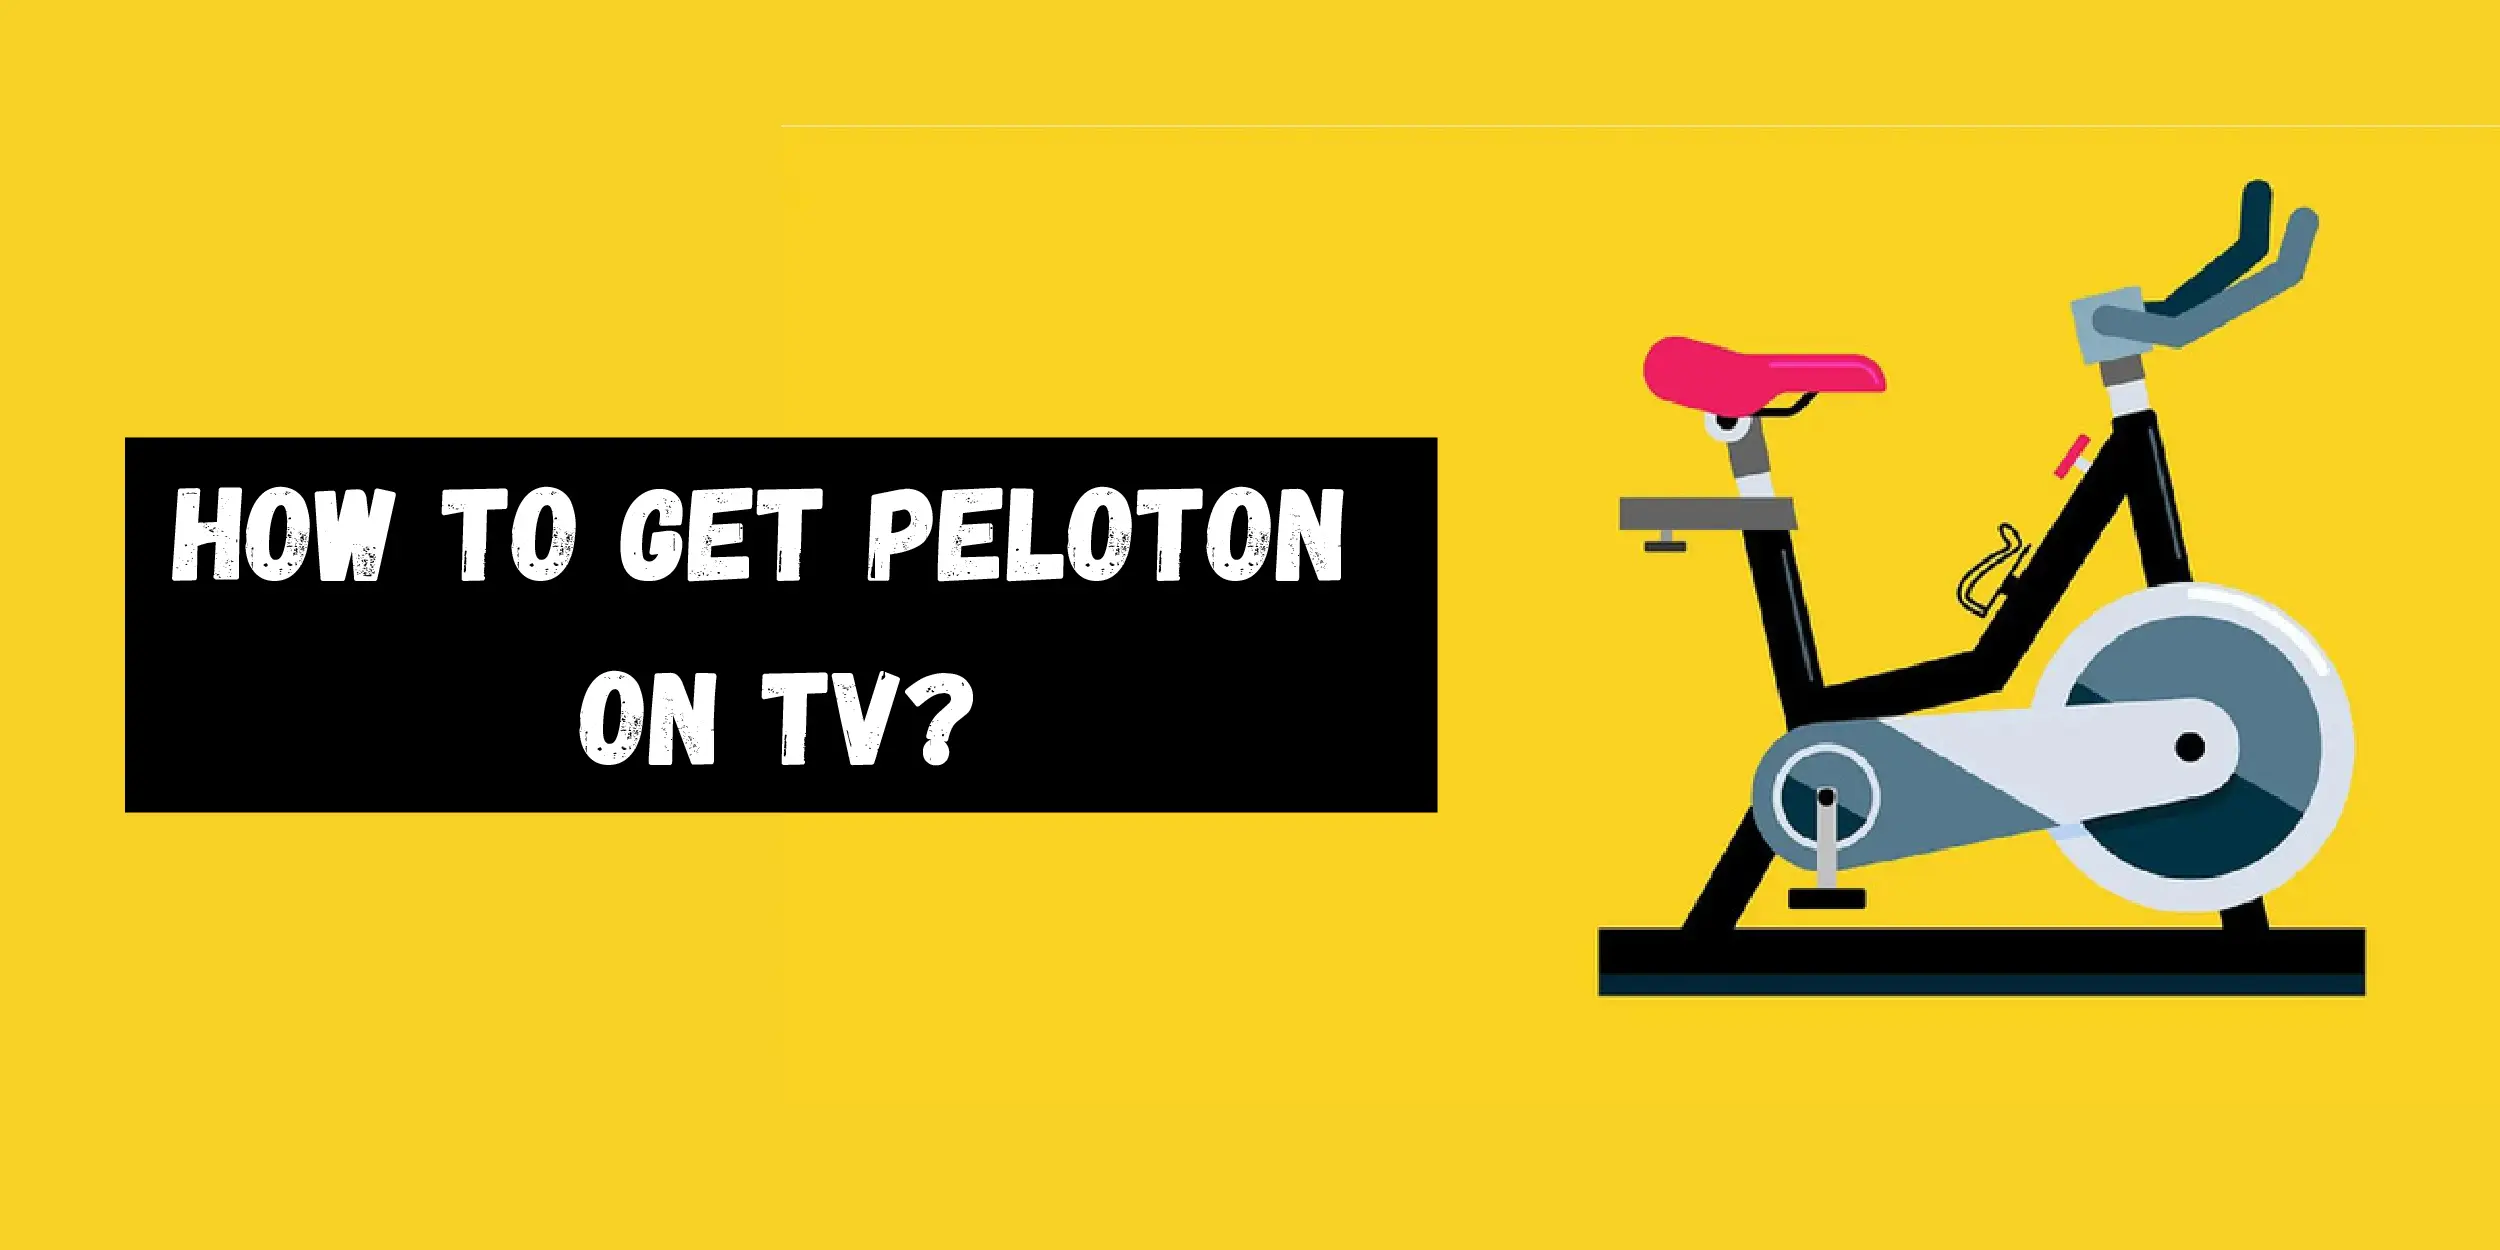 How to Get Peloton on TV?